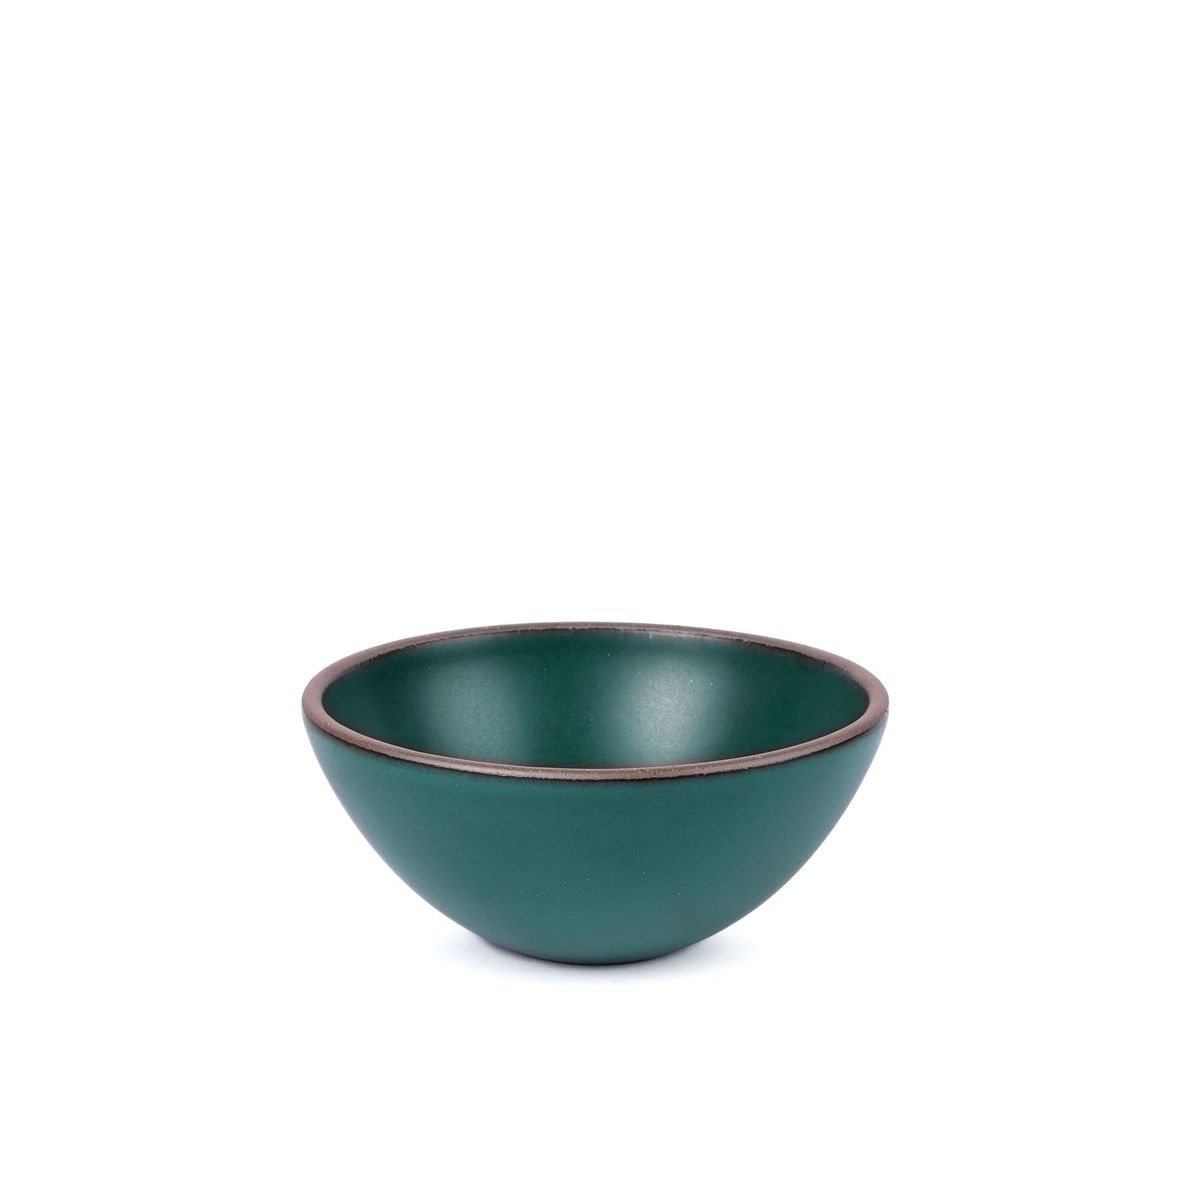 A medium rounded ceramic bowl in a deep dark teal color featuring iron speckles and an unglazed rim